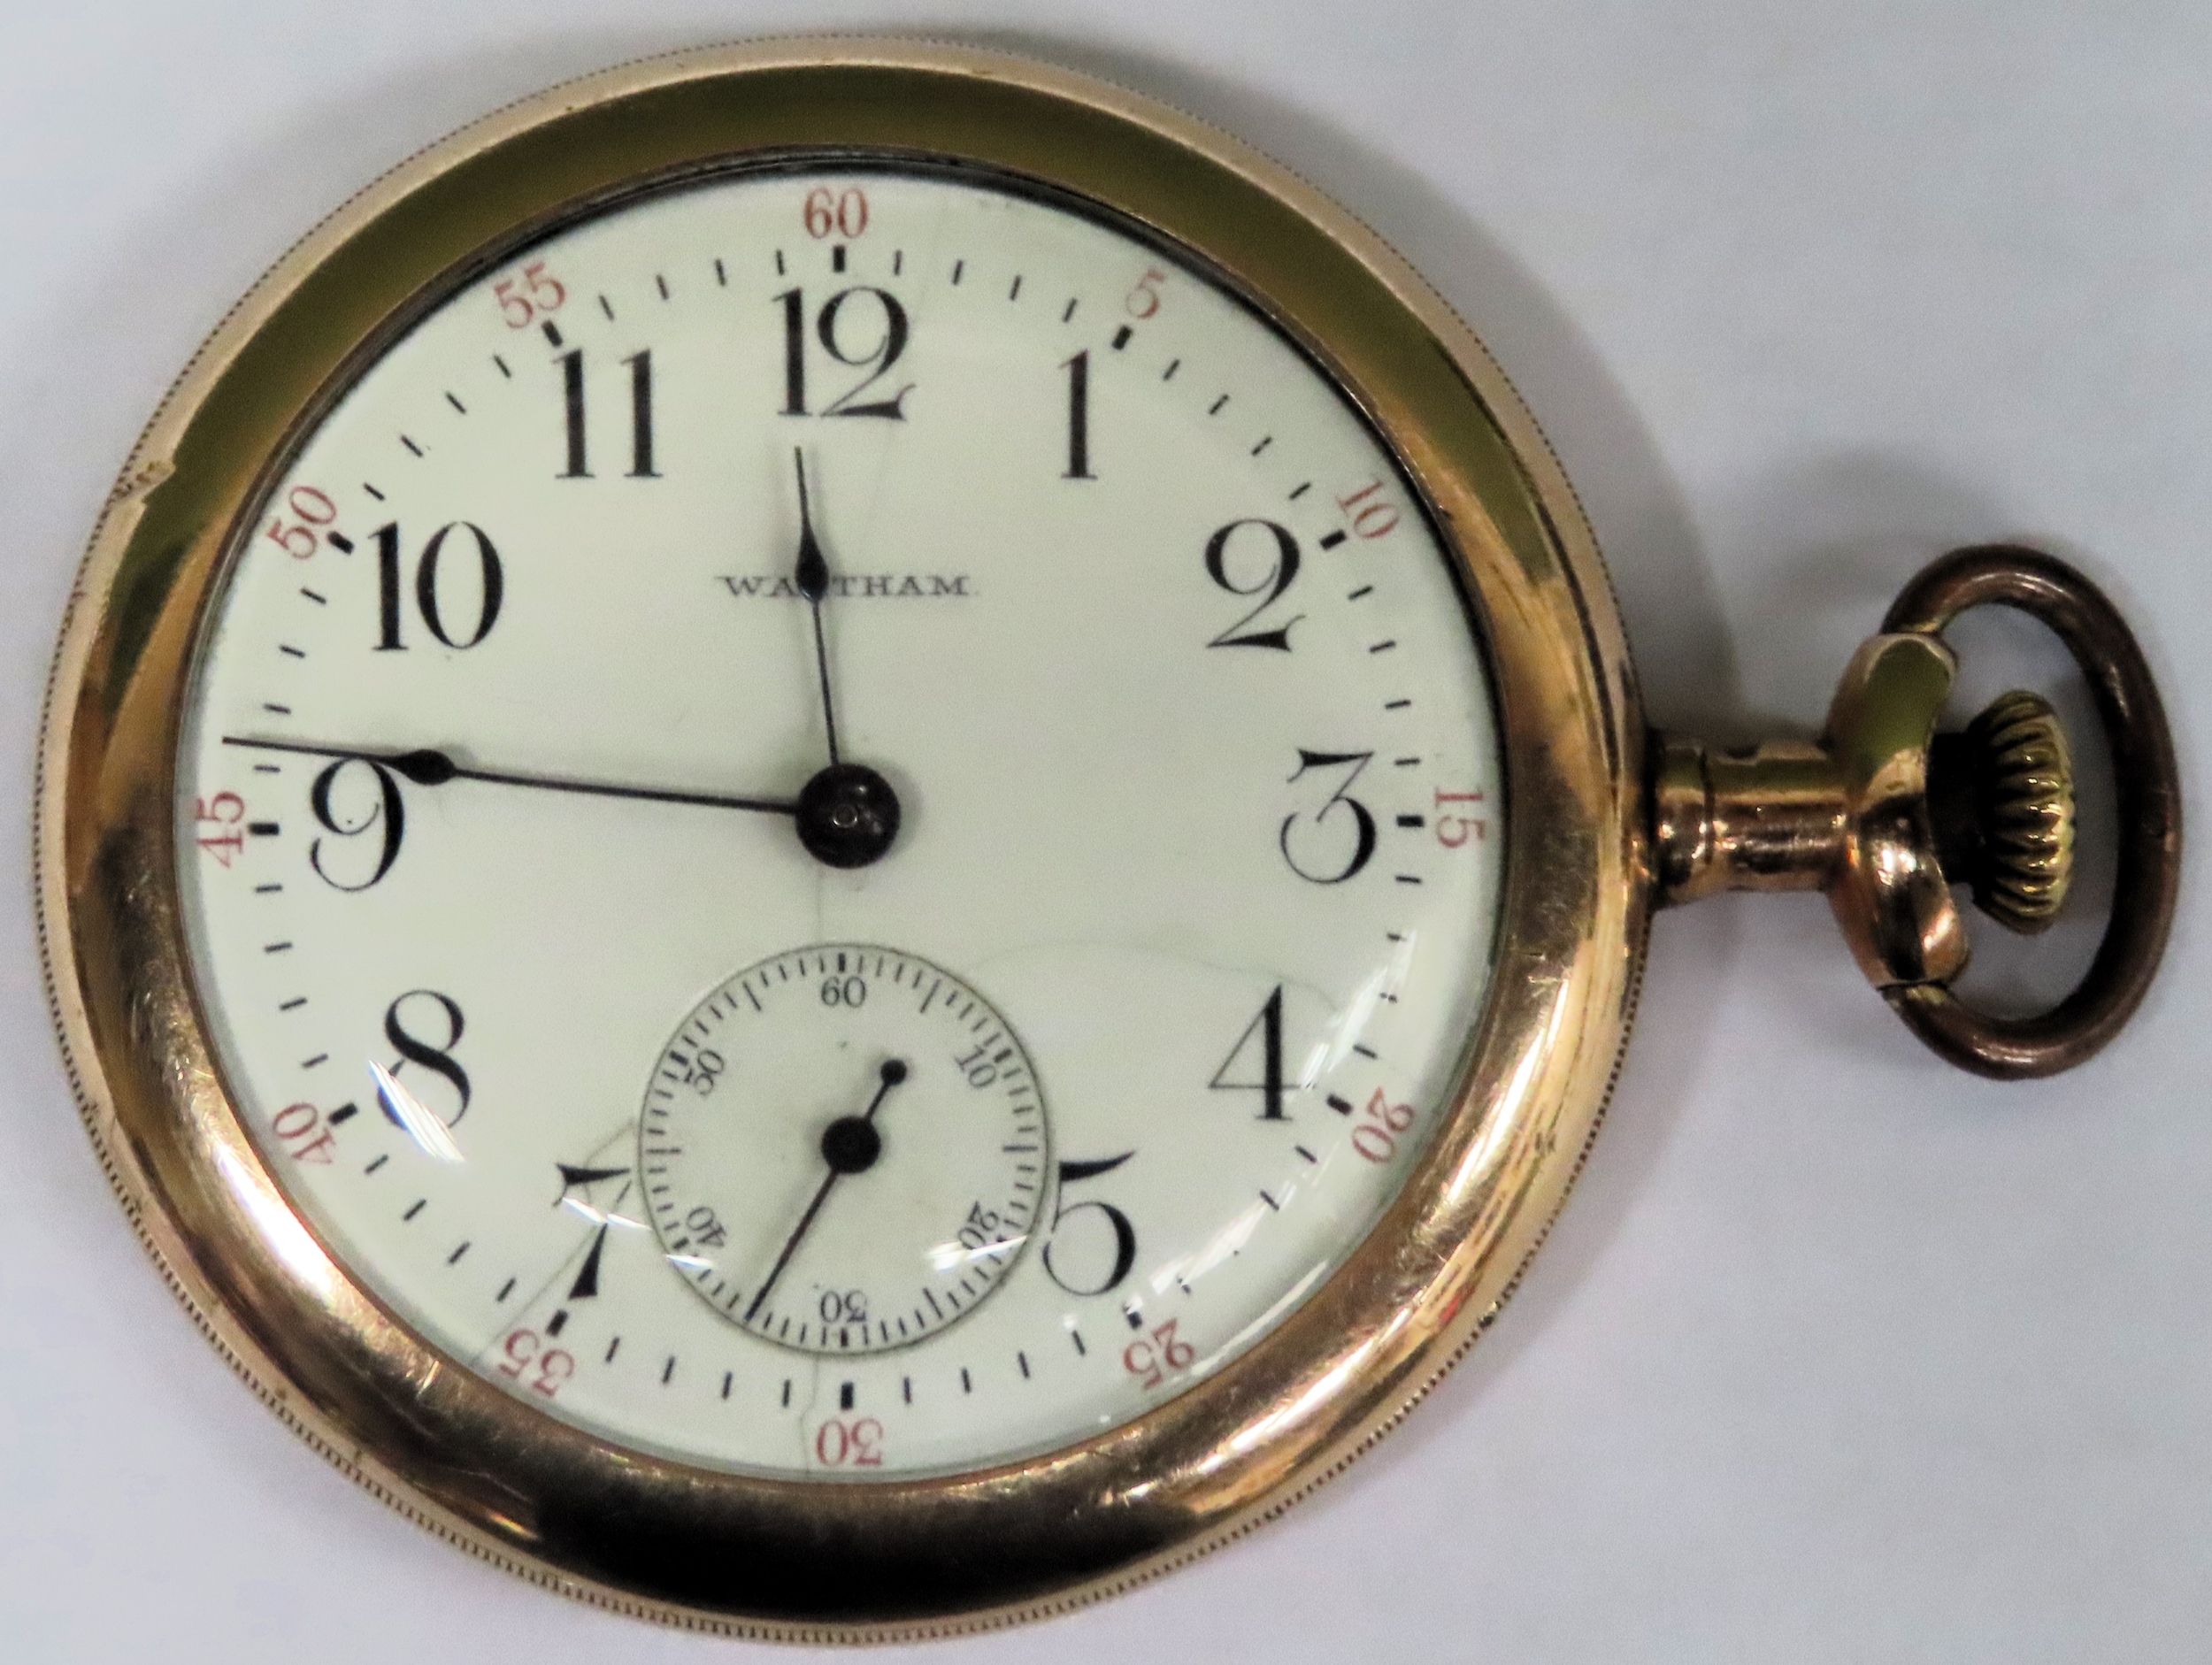 Waltham Gold plated Art Deco style pocket watch with enamelled dial Used condition, not tested for